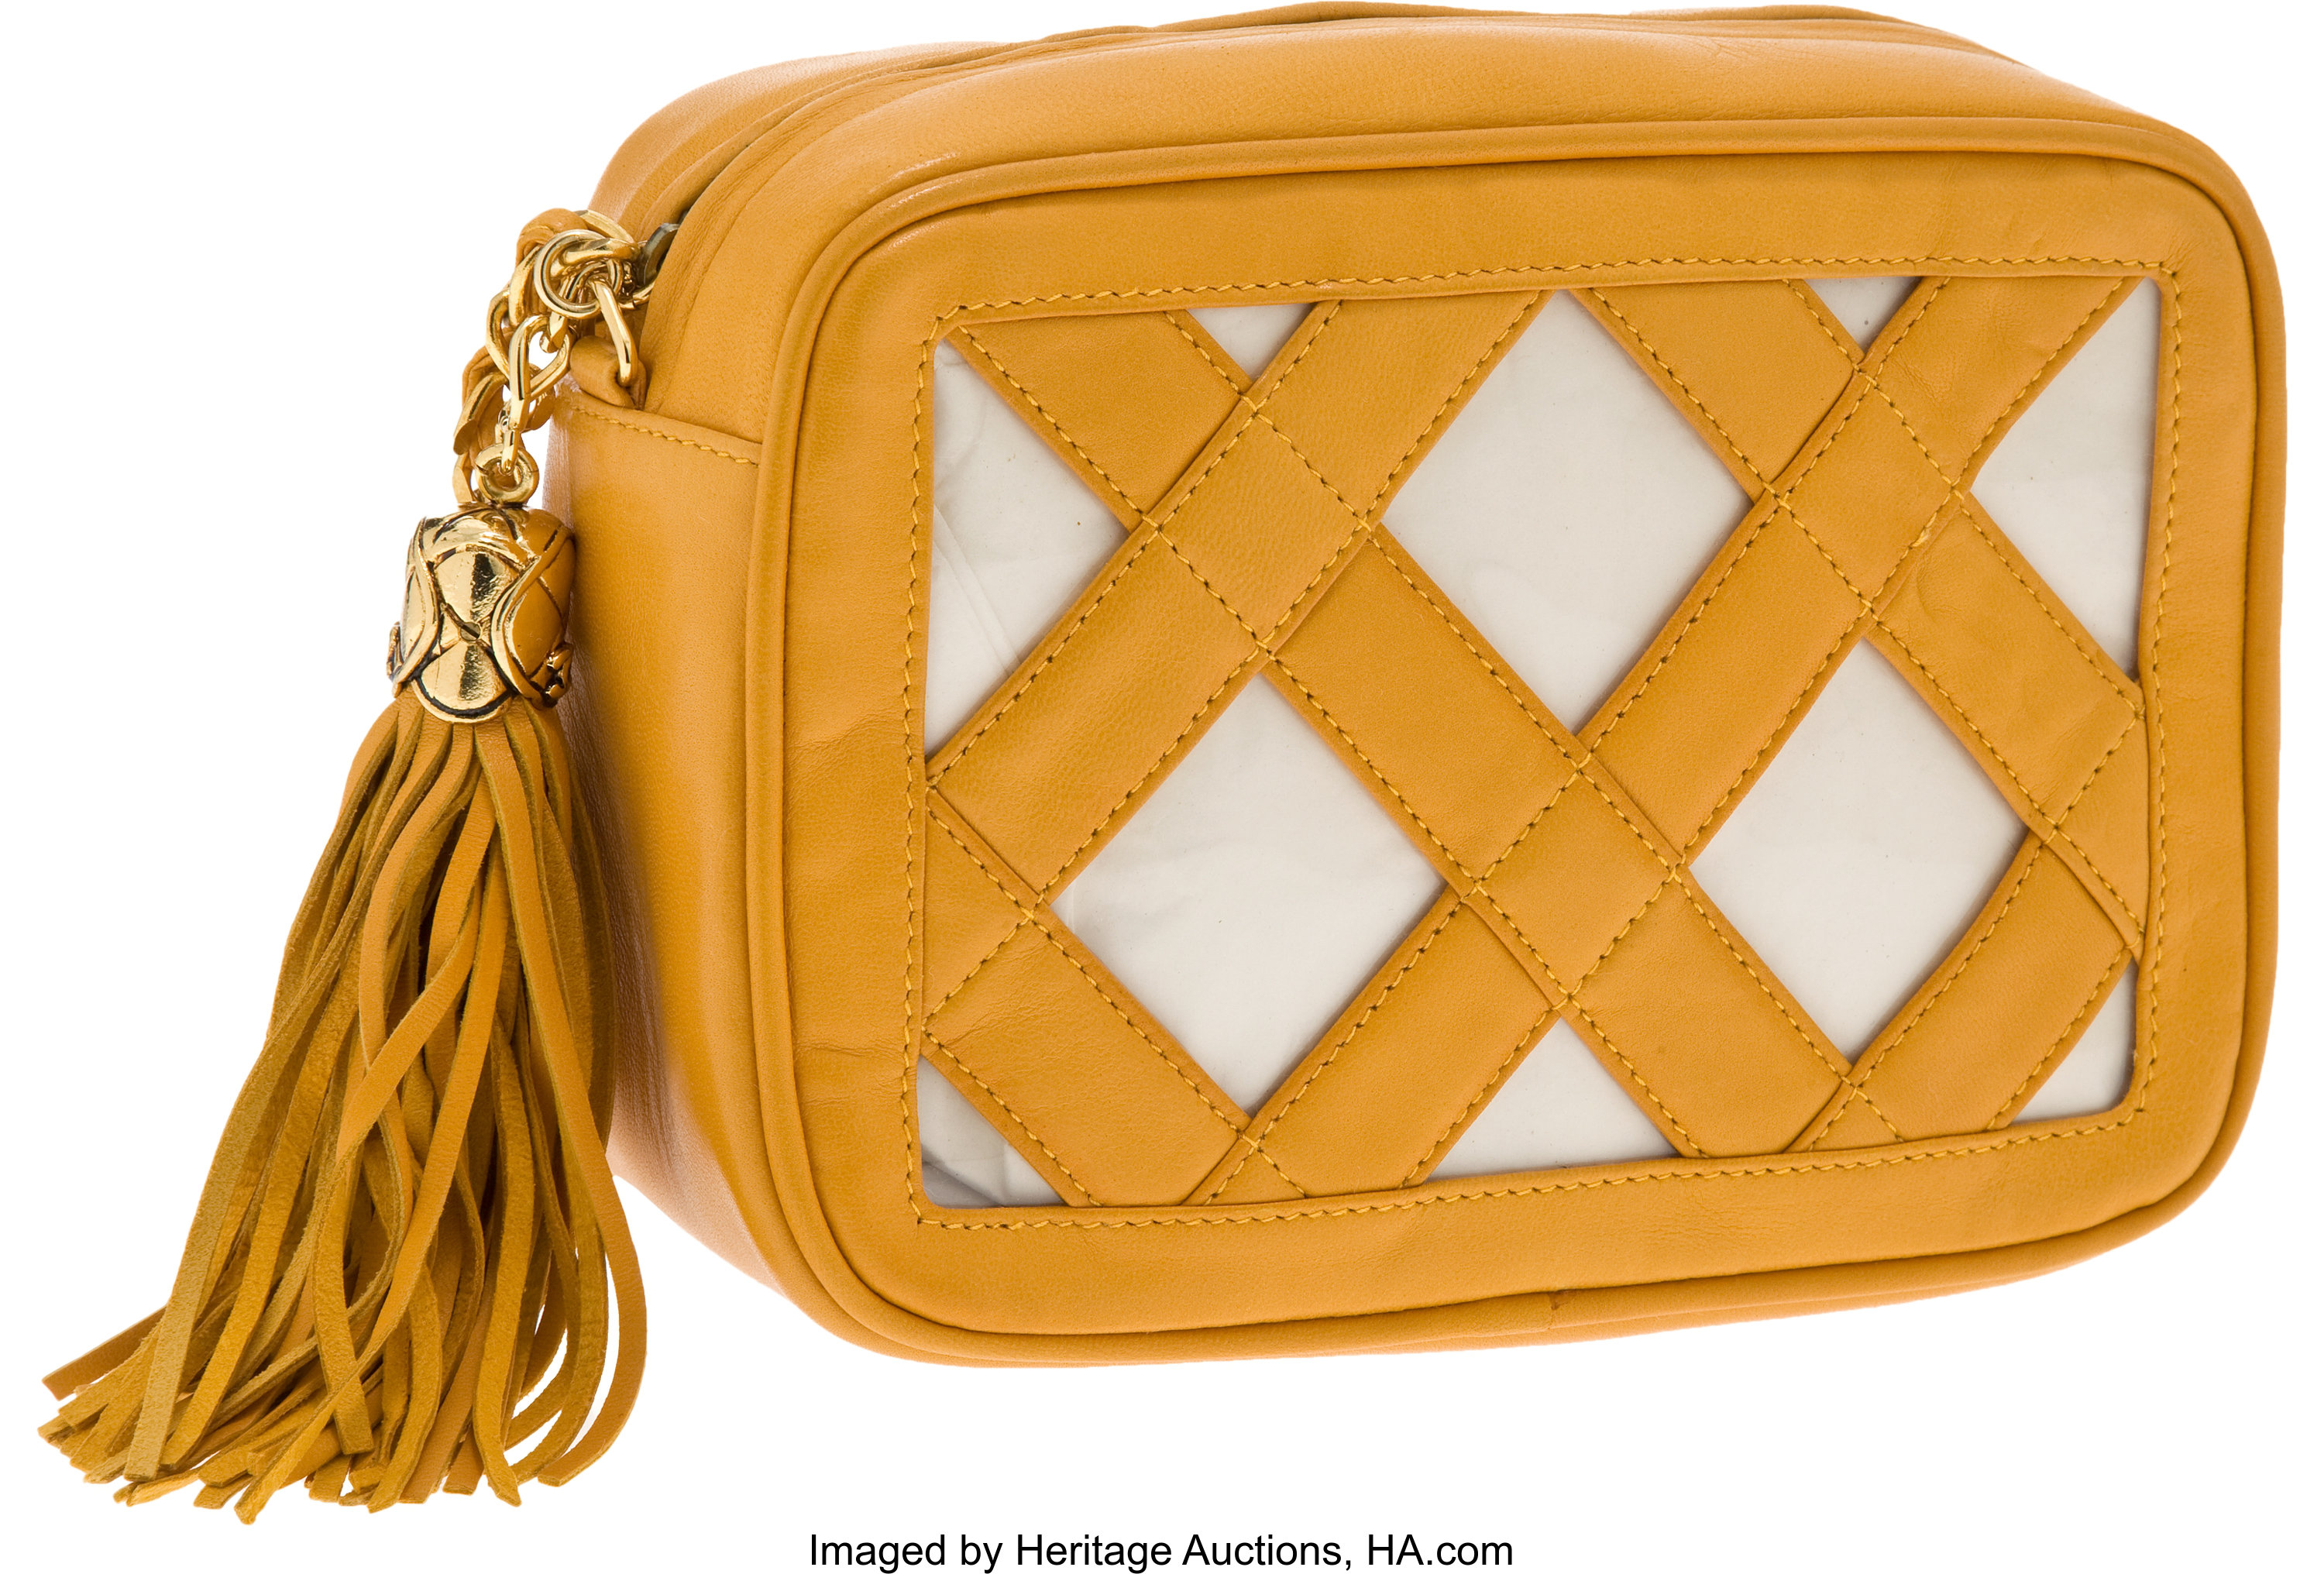 Chanel Yellow Leather and Plastic Criss-Cross Square Bag with Gold